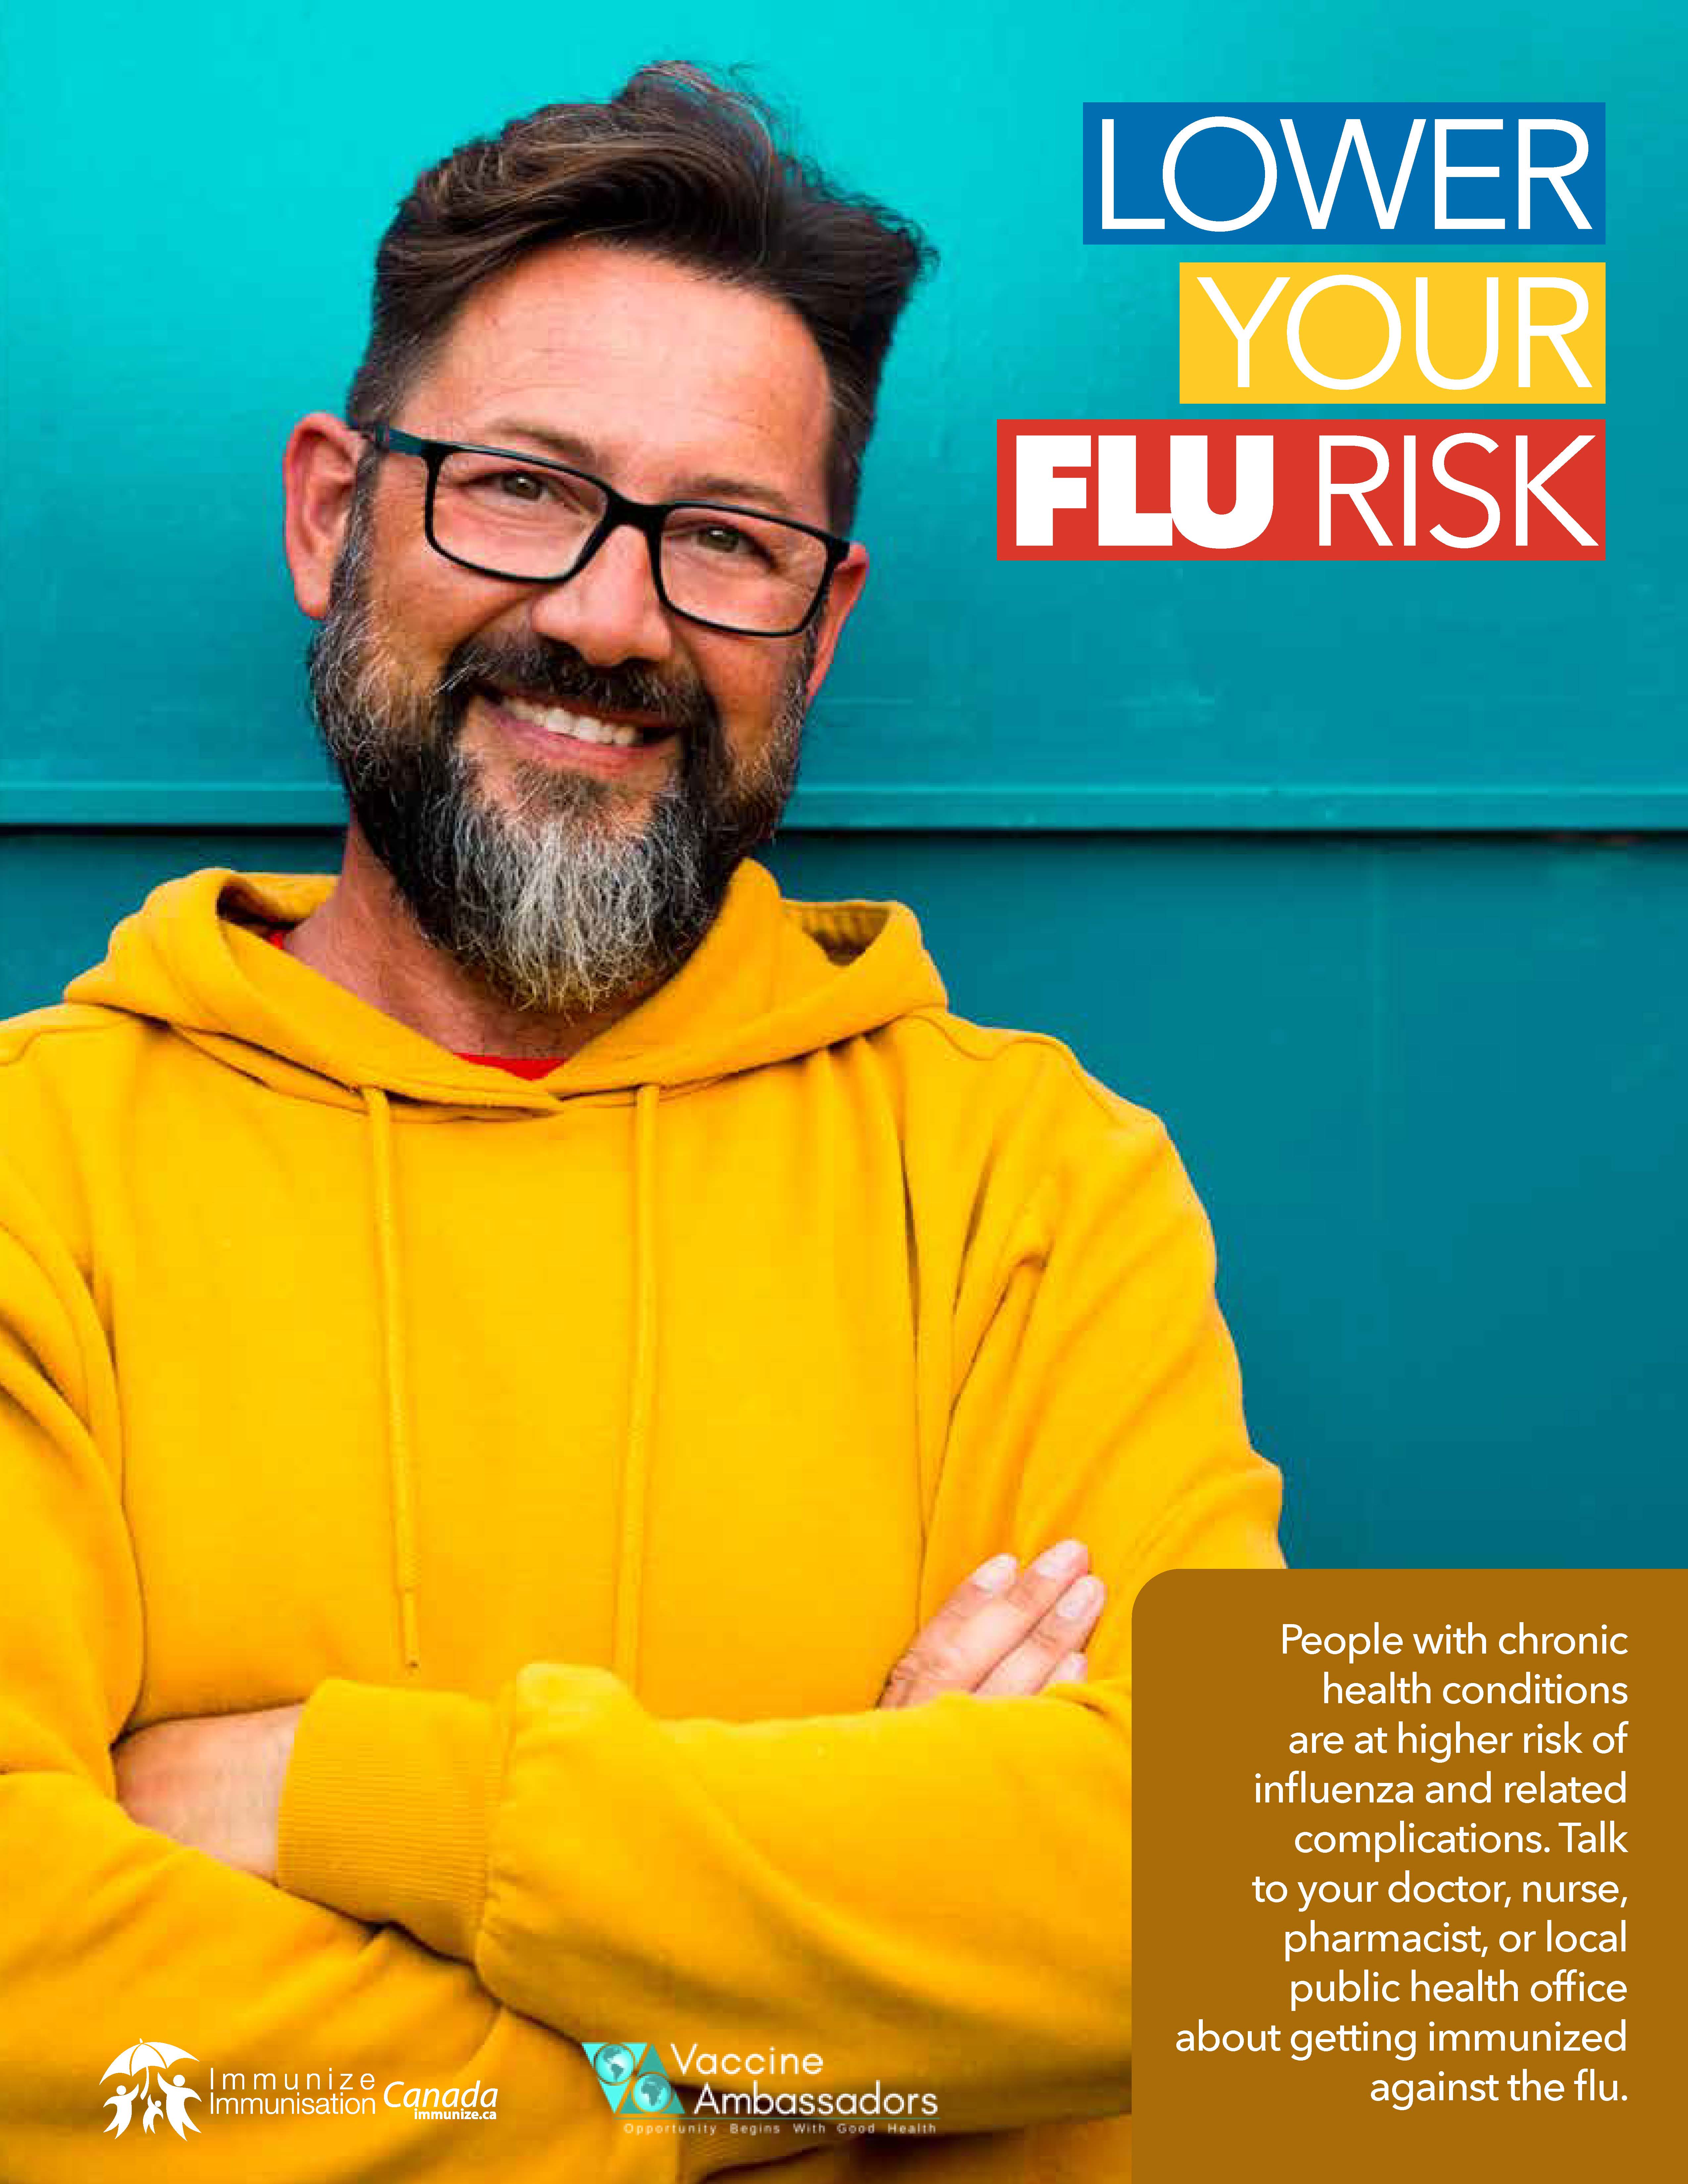 Lower your flu risk - people with chronic medical conditions